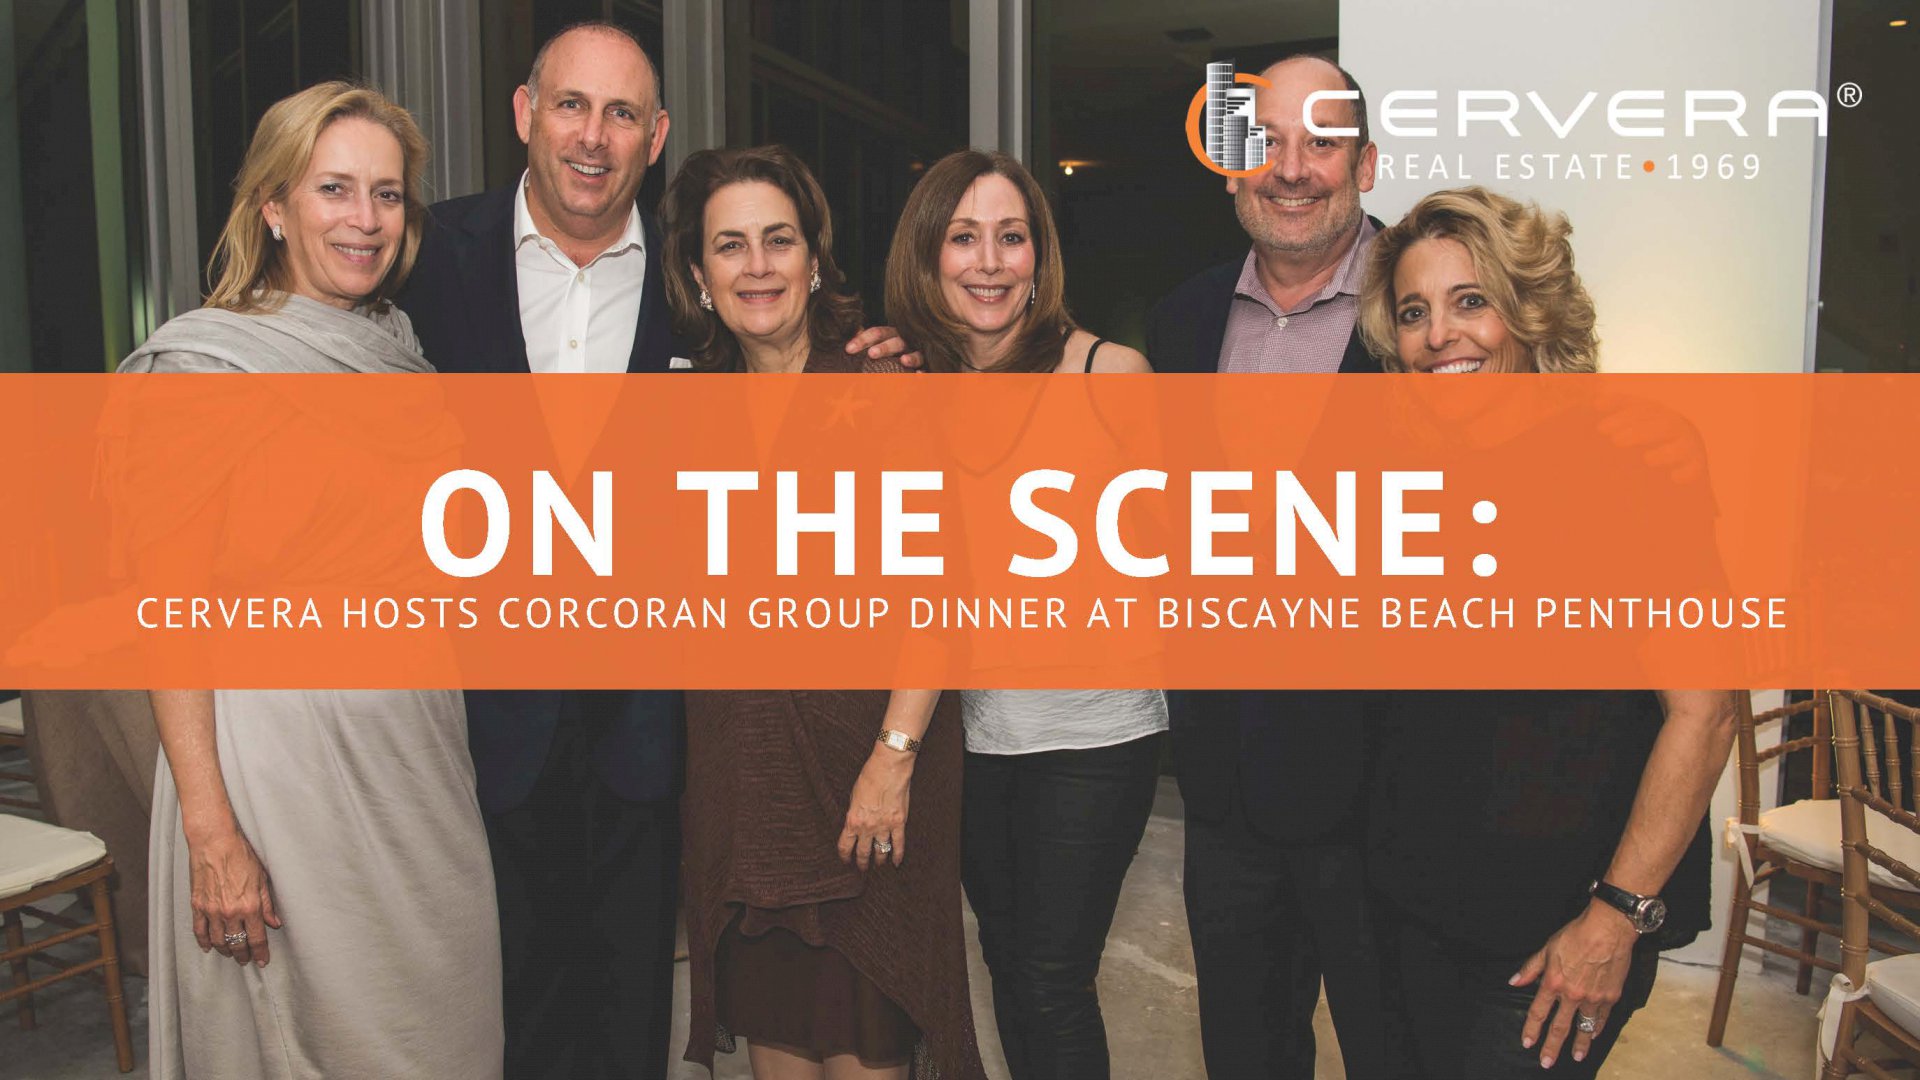 On the Scene: Corcoran Group Dinner at the Biscayne Beach Penthouse